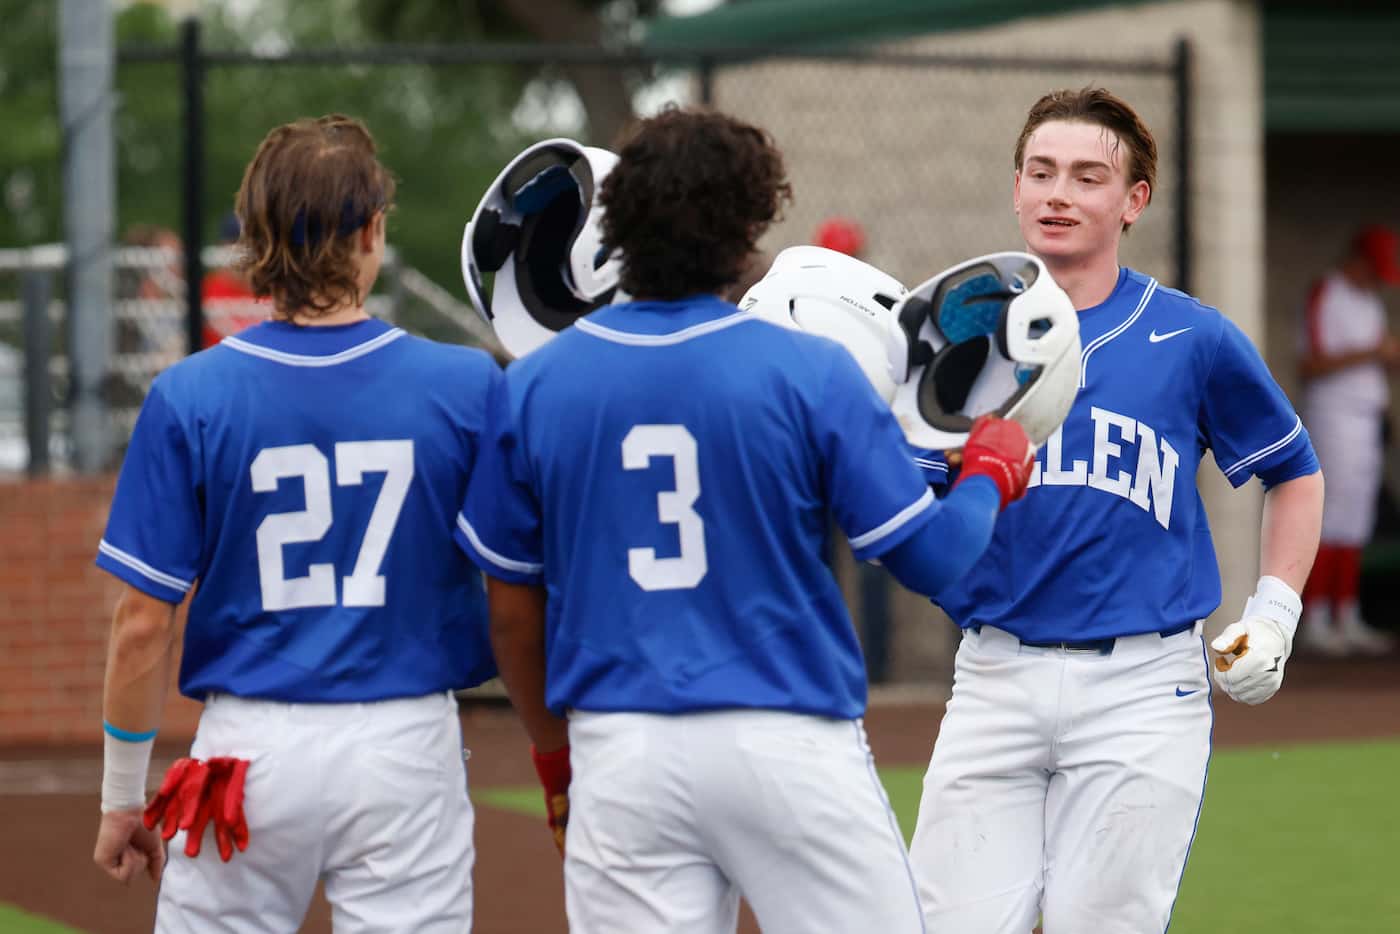  Allen high’s Caden Young (right) is greeted by his teammates after hitting a homerun during...